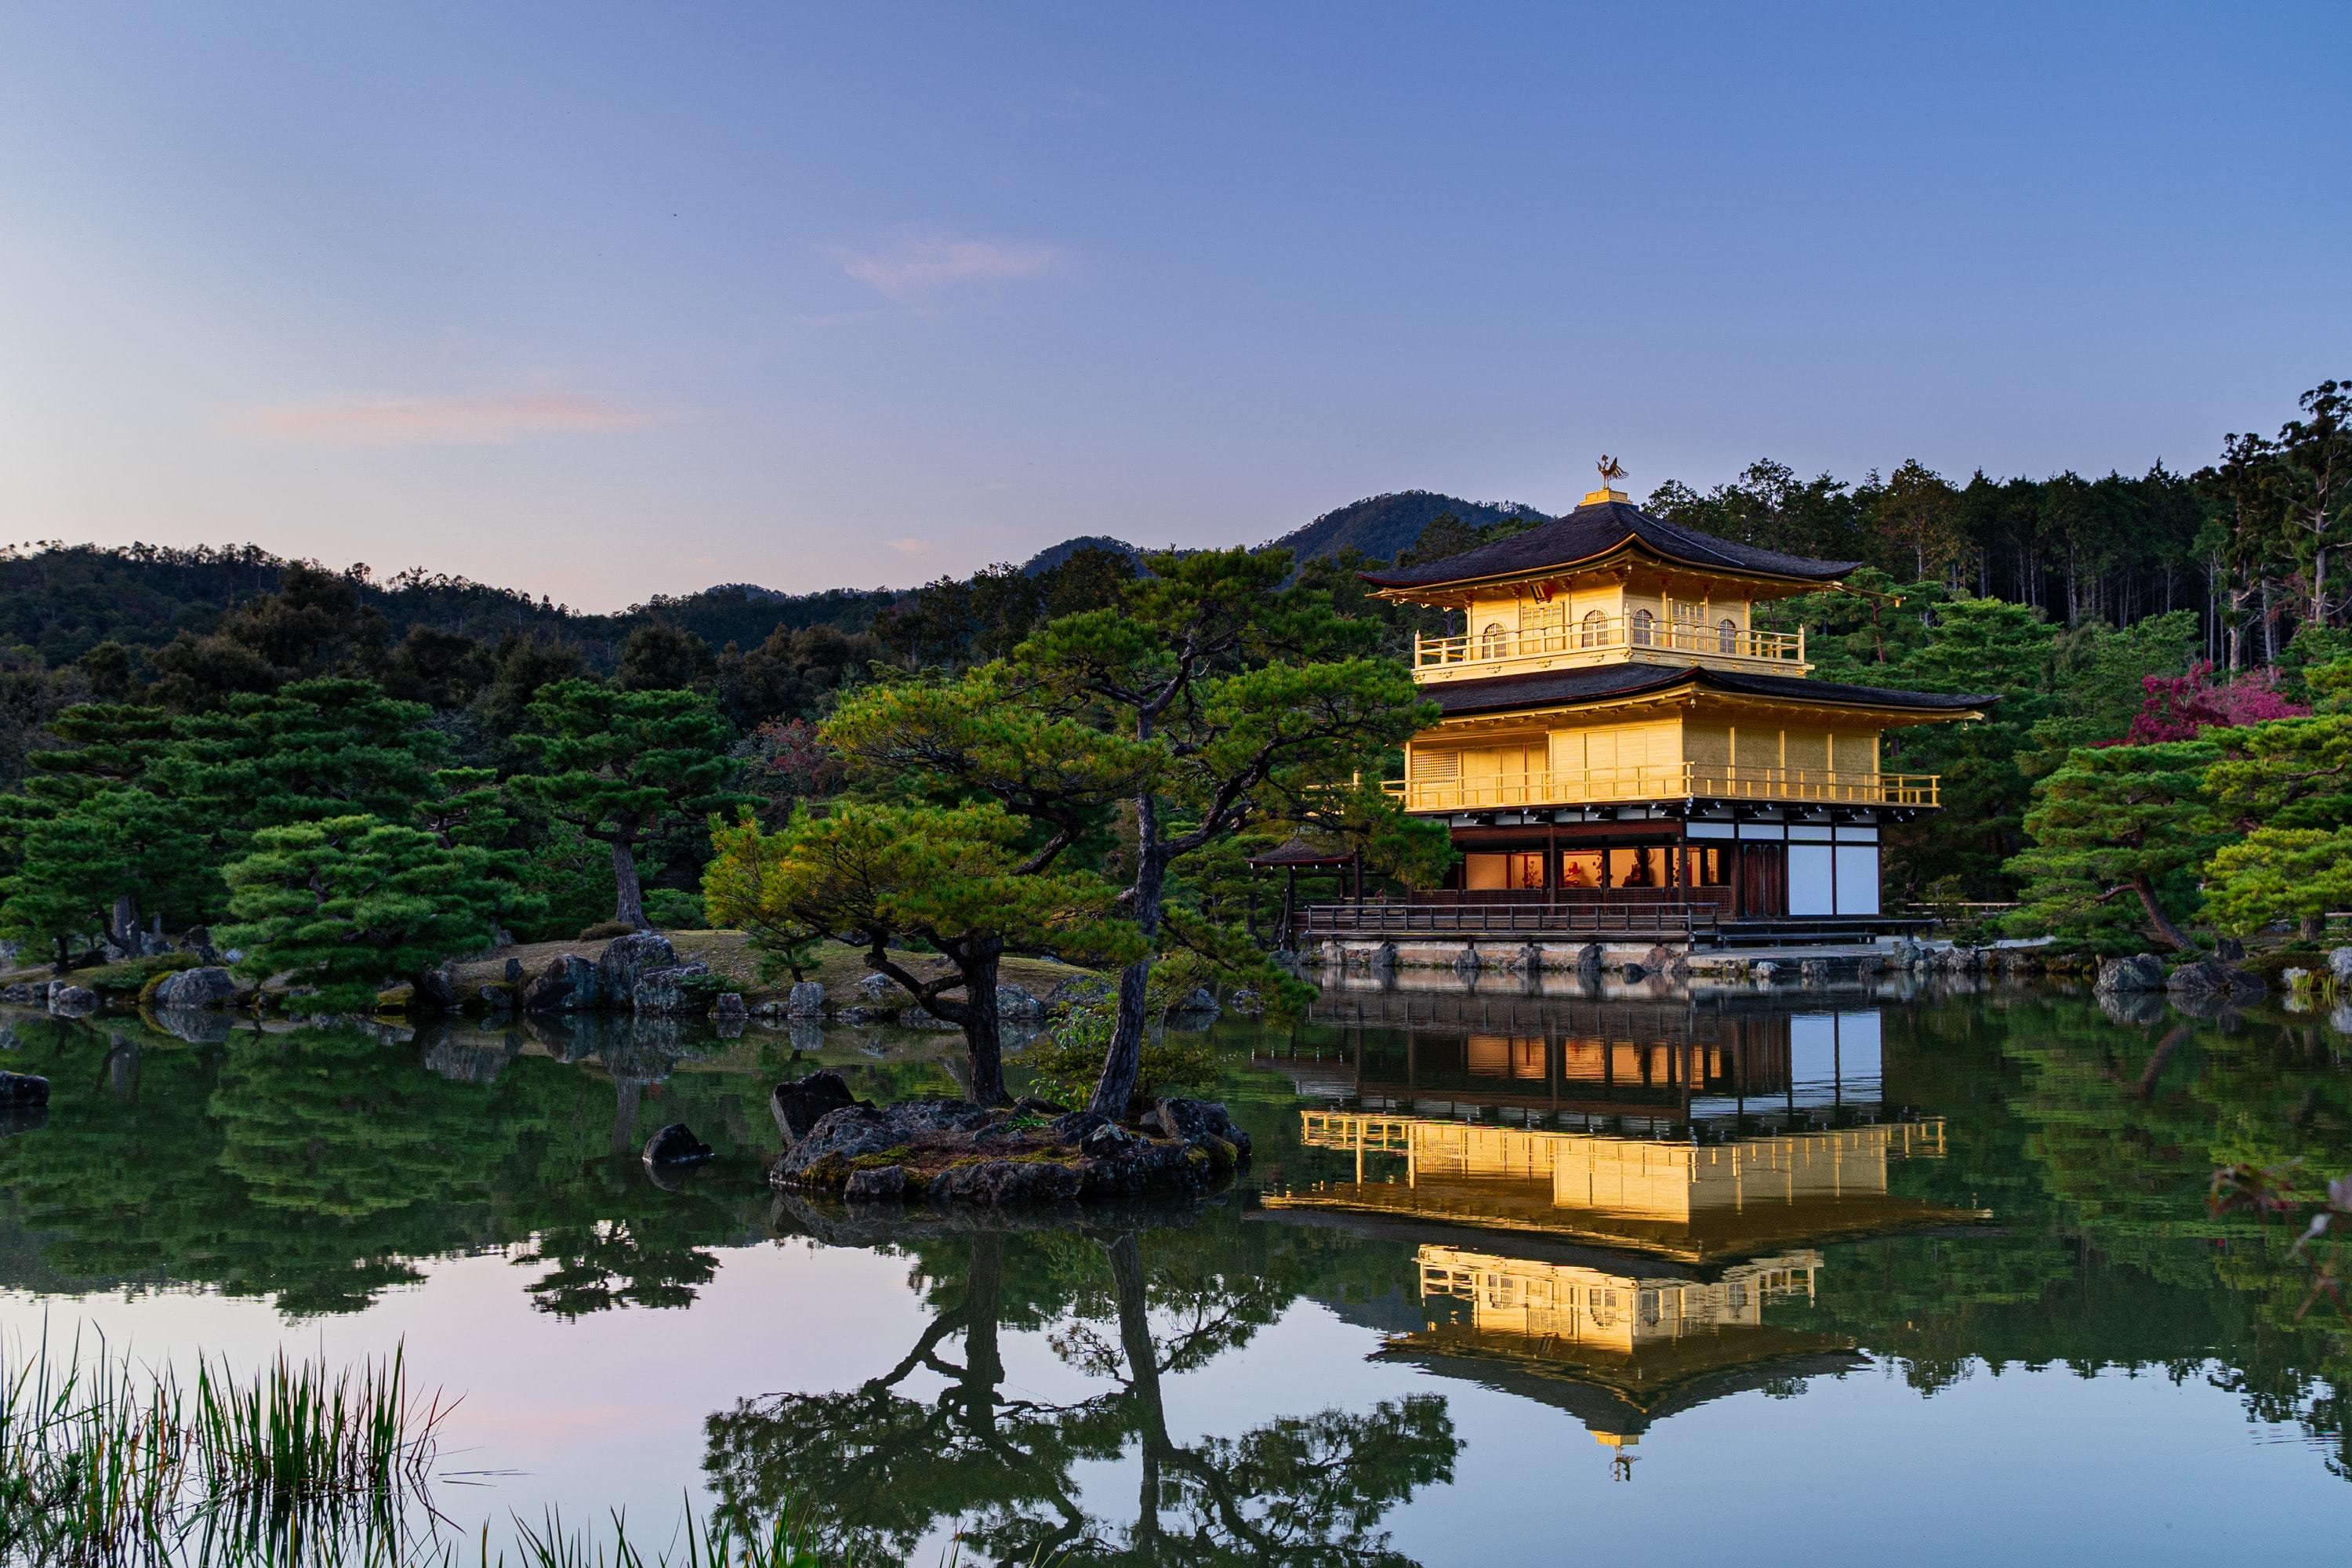 of the most beautiful places in Japan